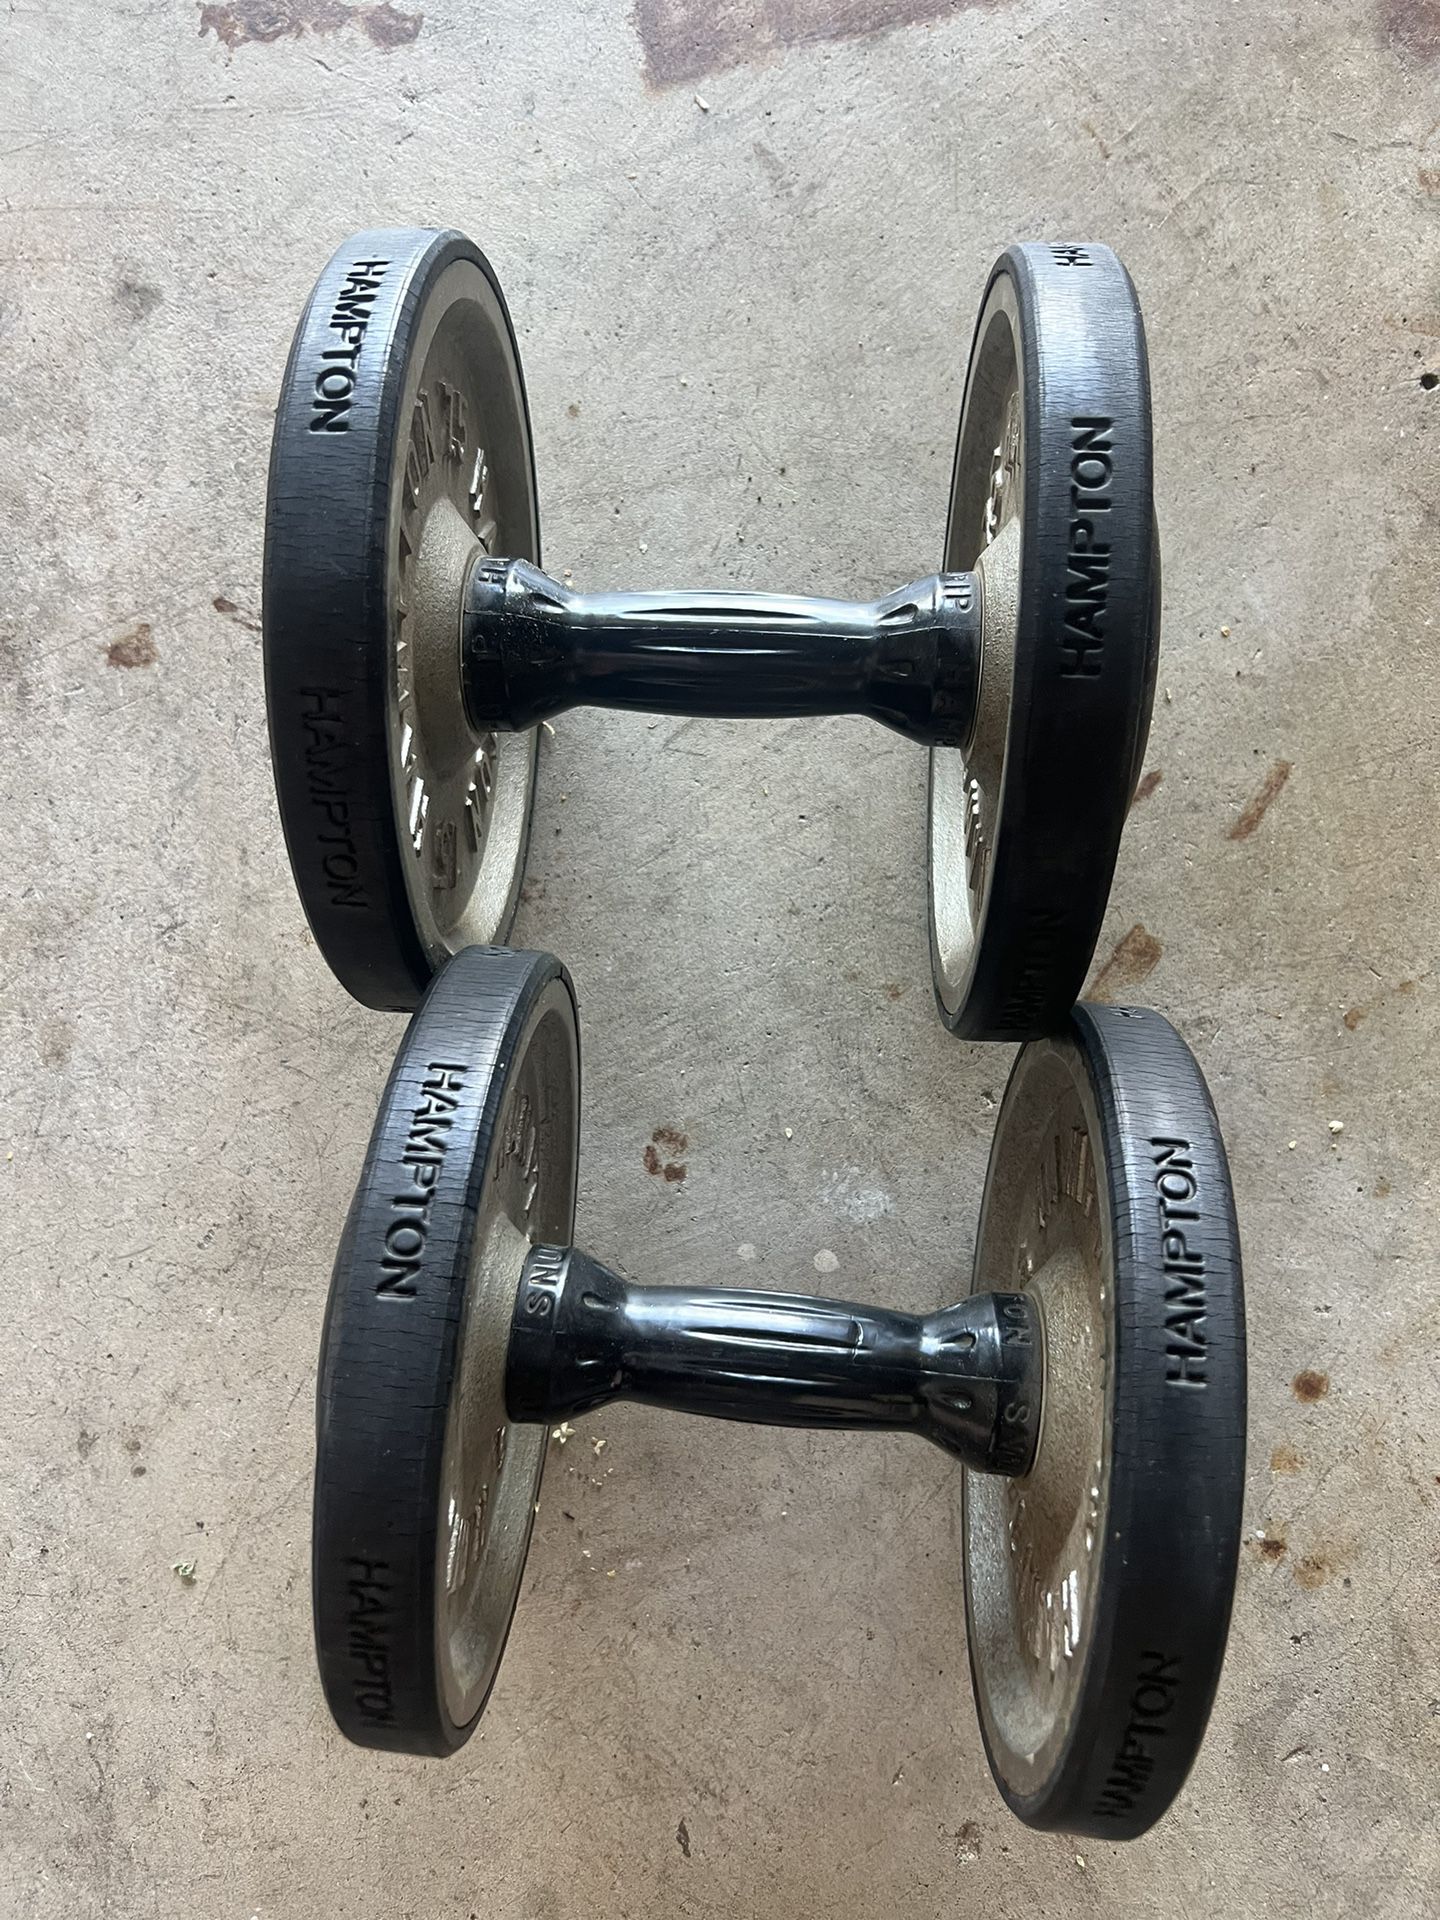 2 20 Pound Dumbbell Weights